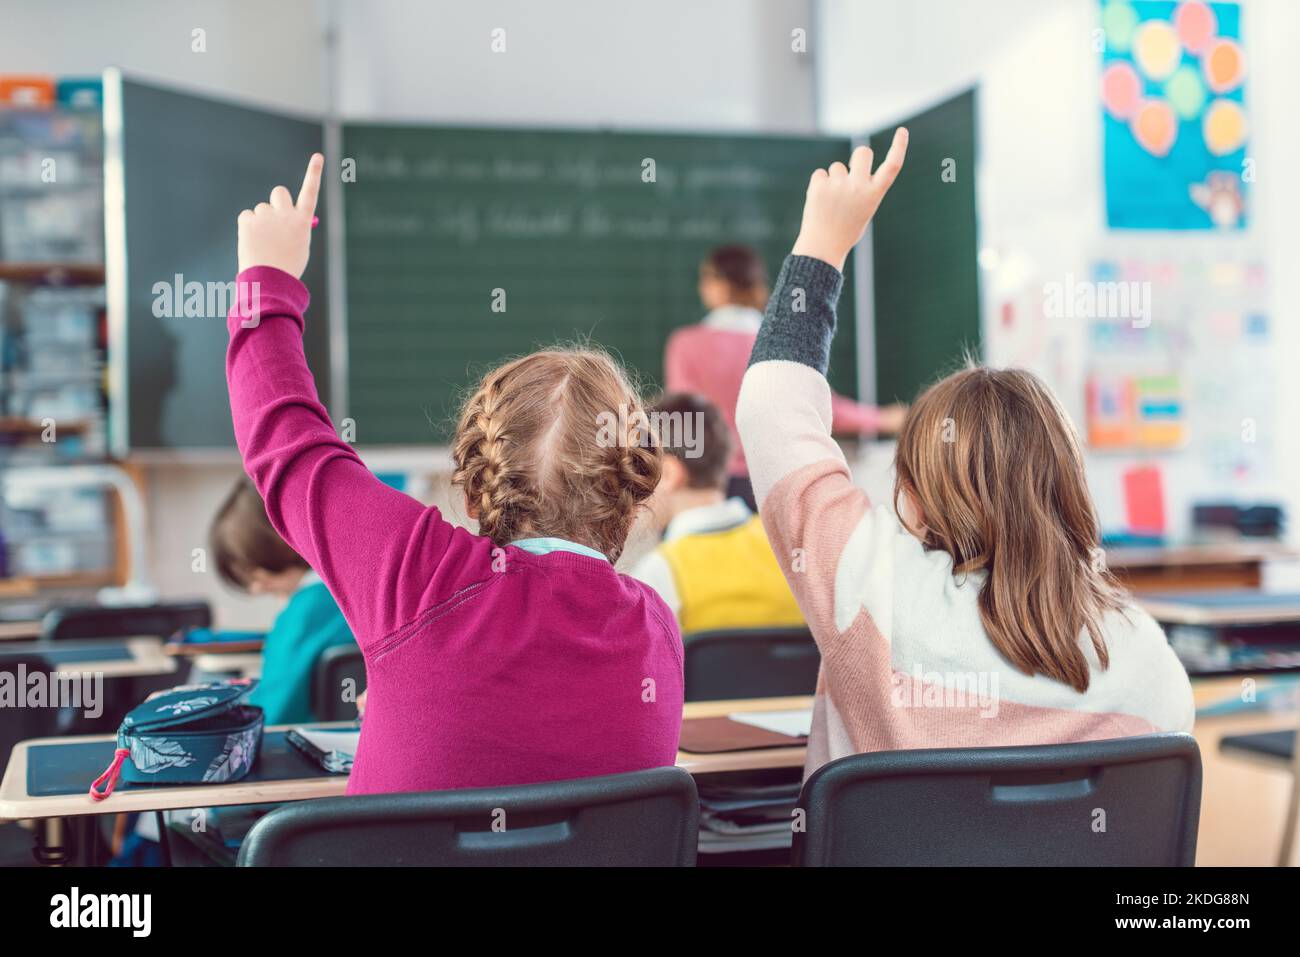 Two girl students raising hands to answer a question in school class Stock Photo